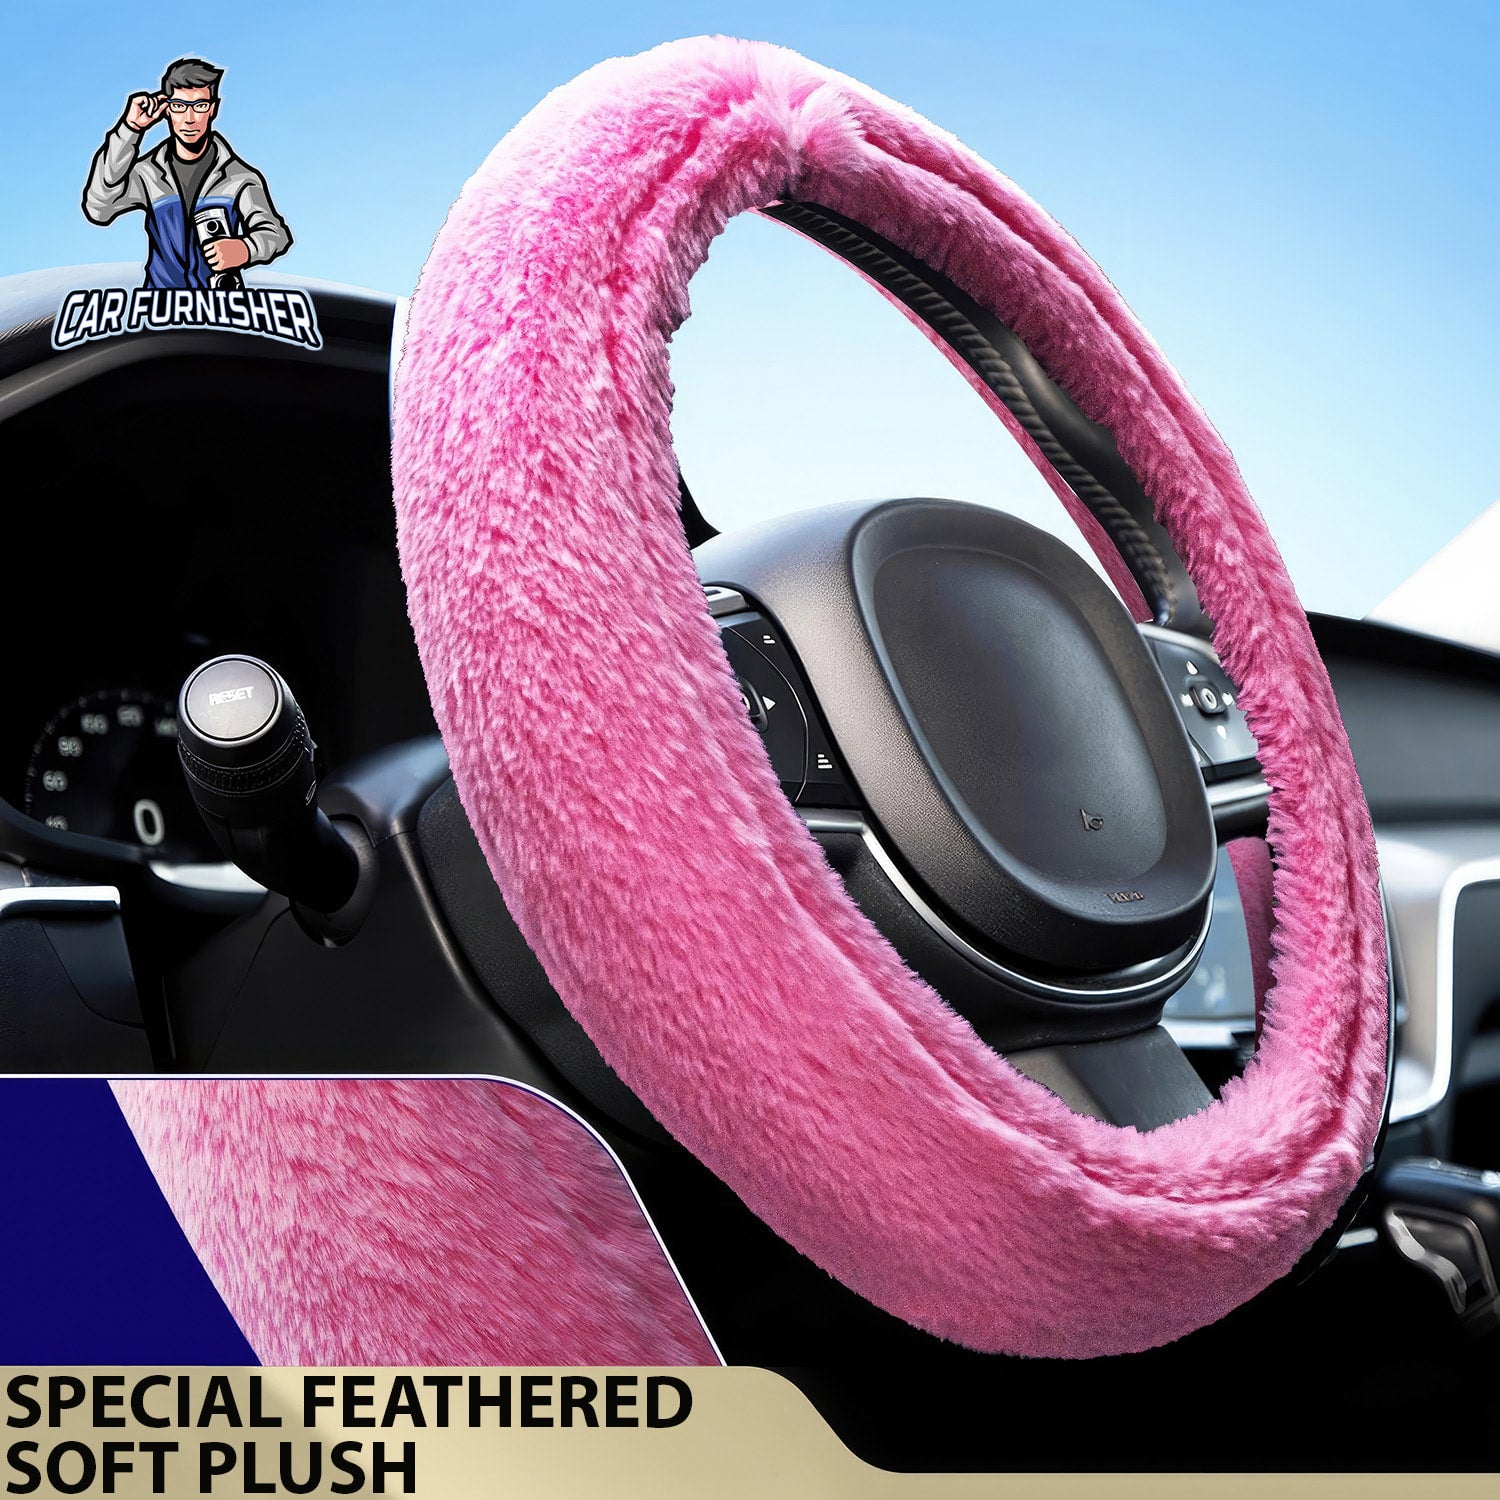 Steering Wheel Cover - Furry Plush Pink Fabric